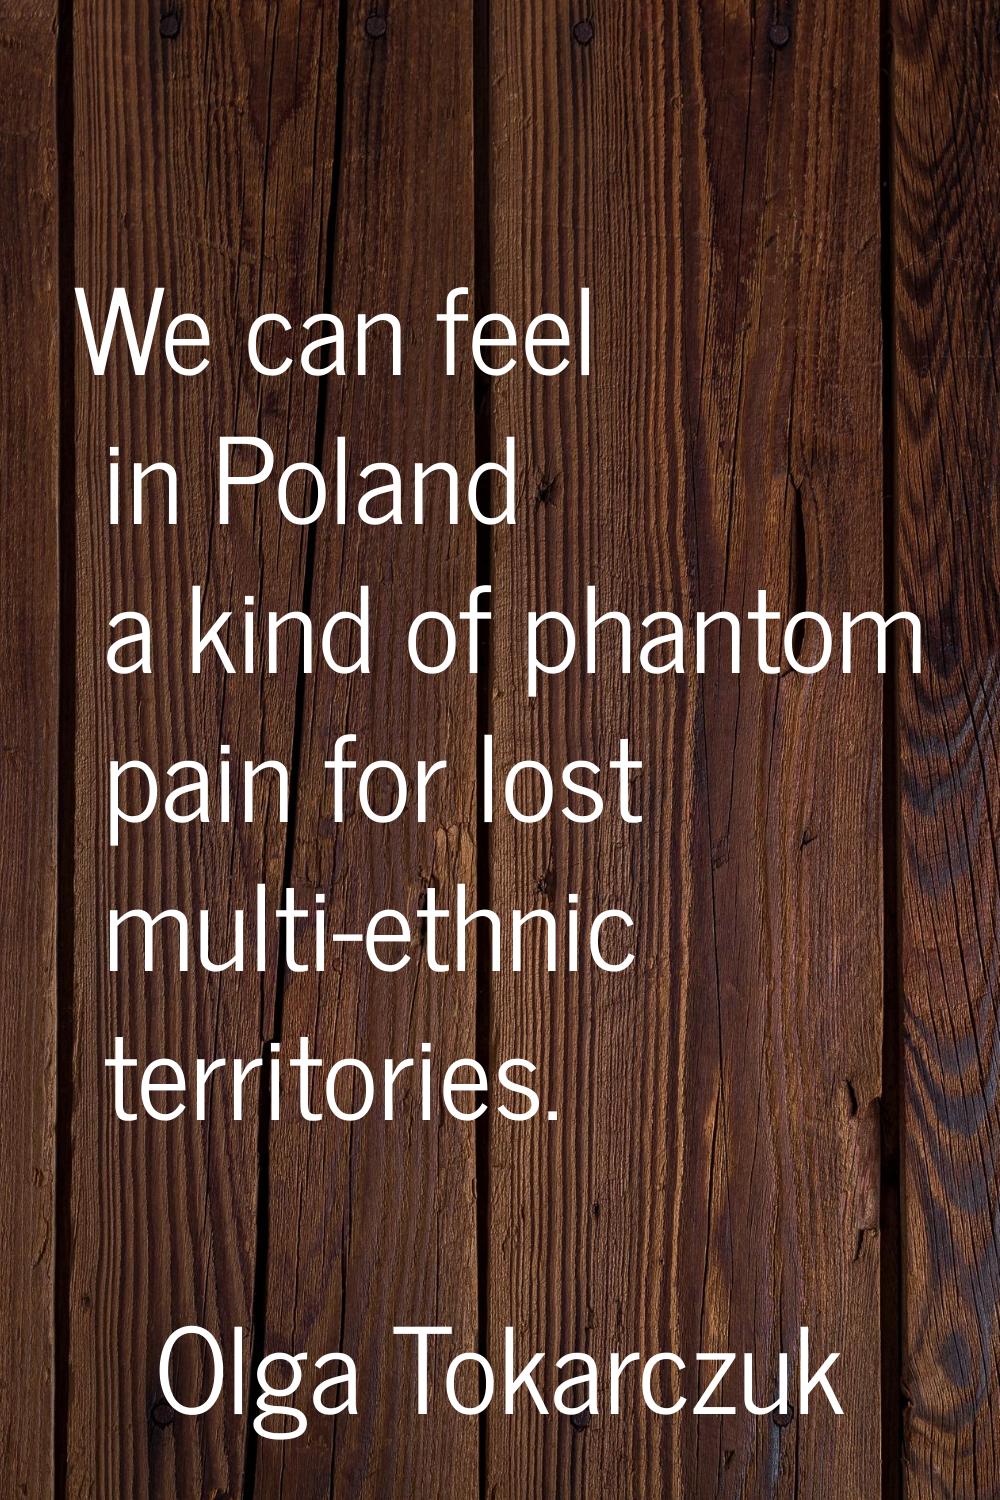 We can feel in Poland a kind of phantom pain for lost multi-ethnic territories.